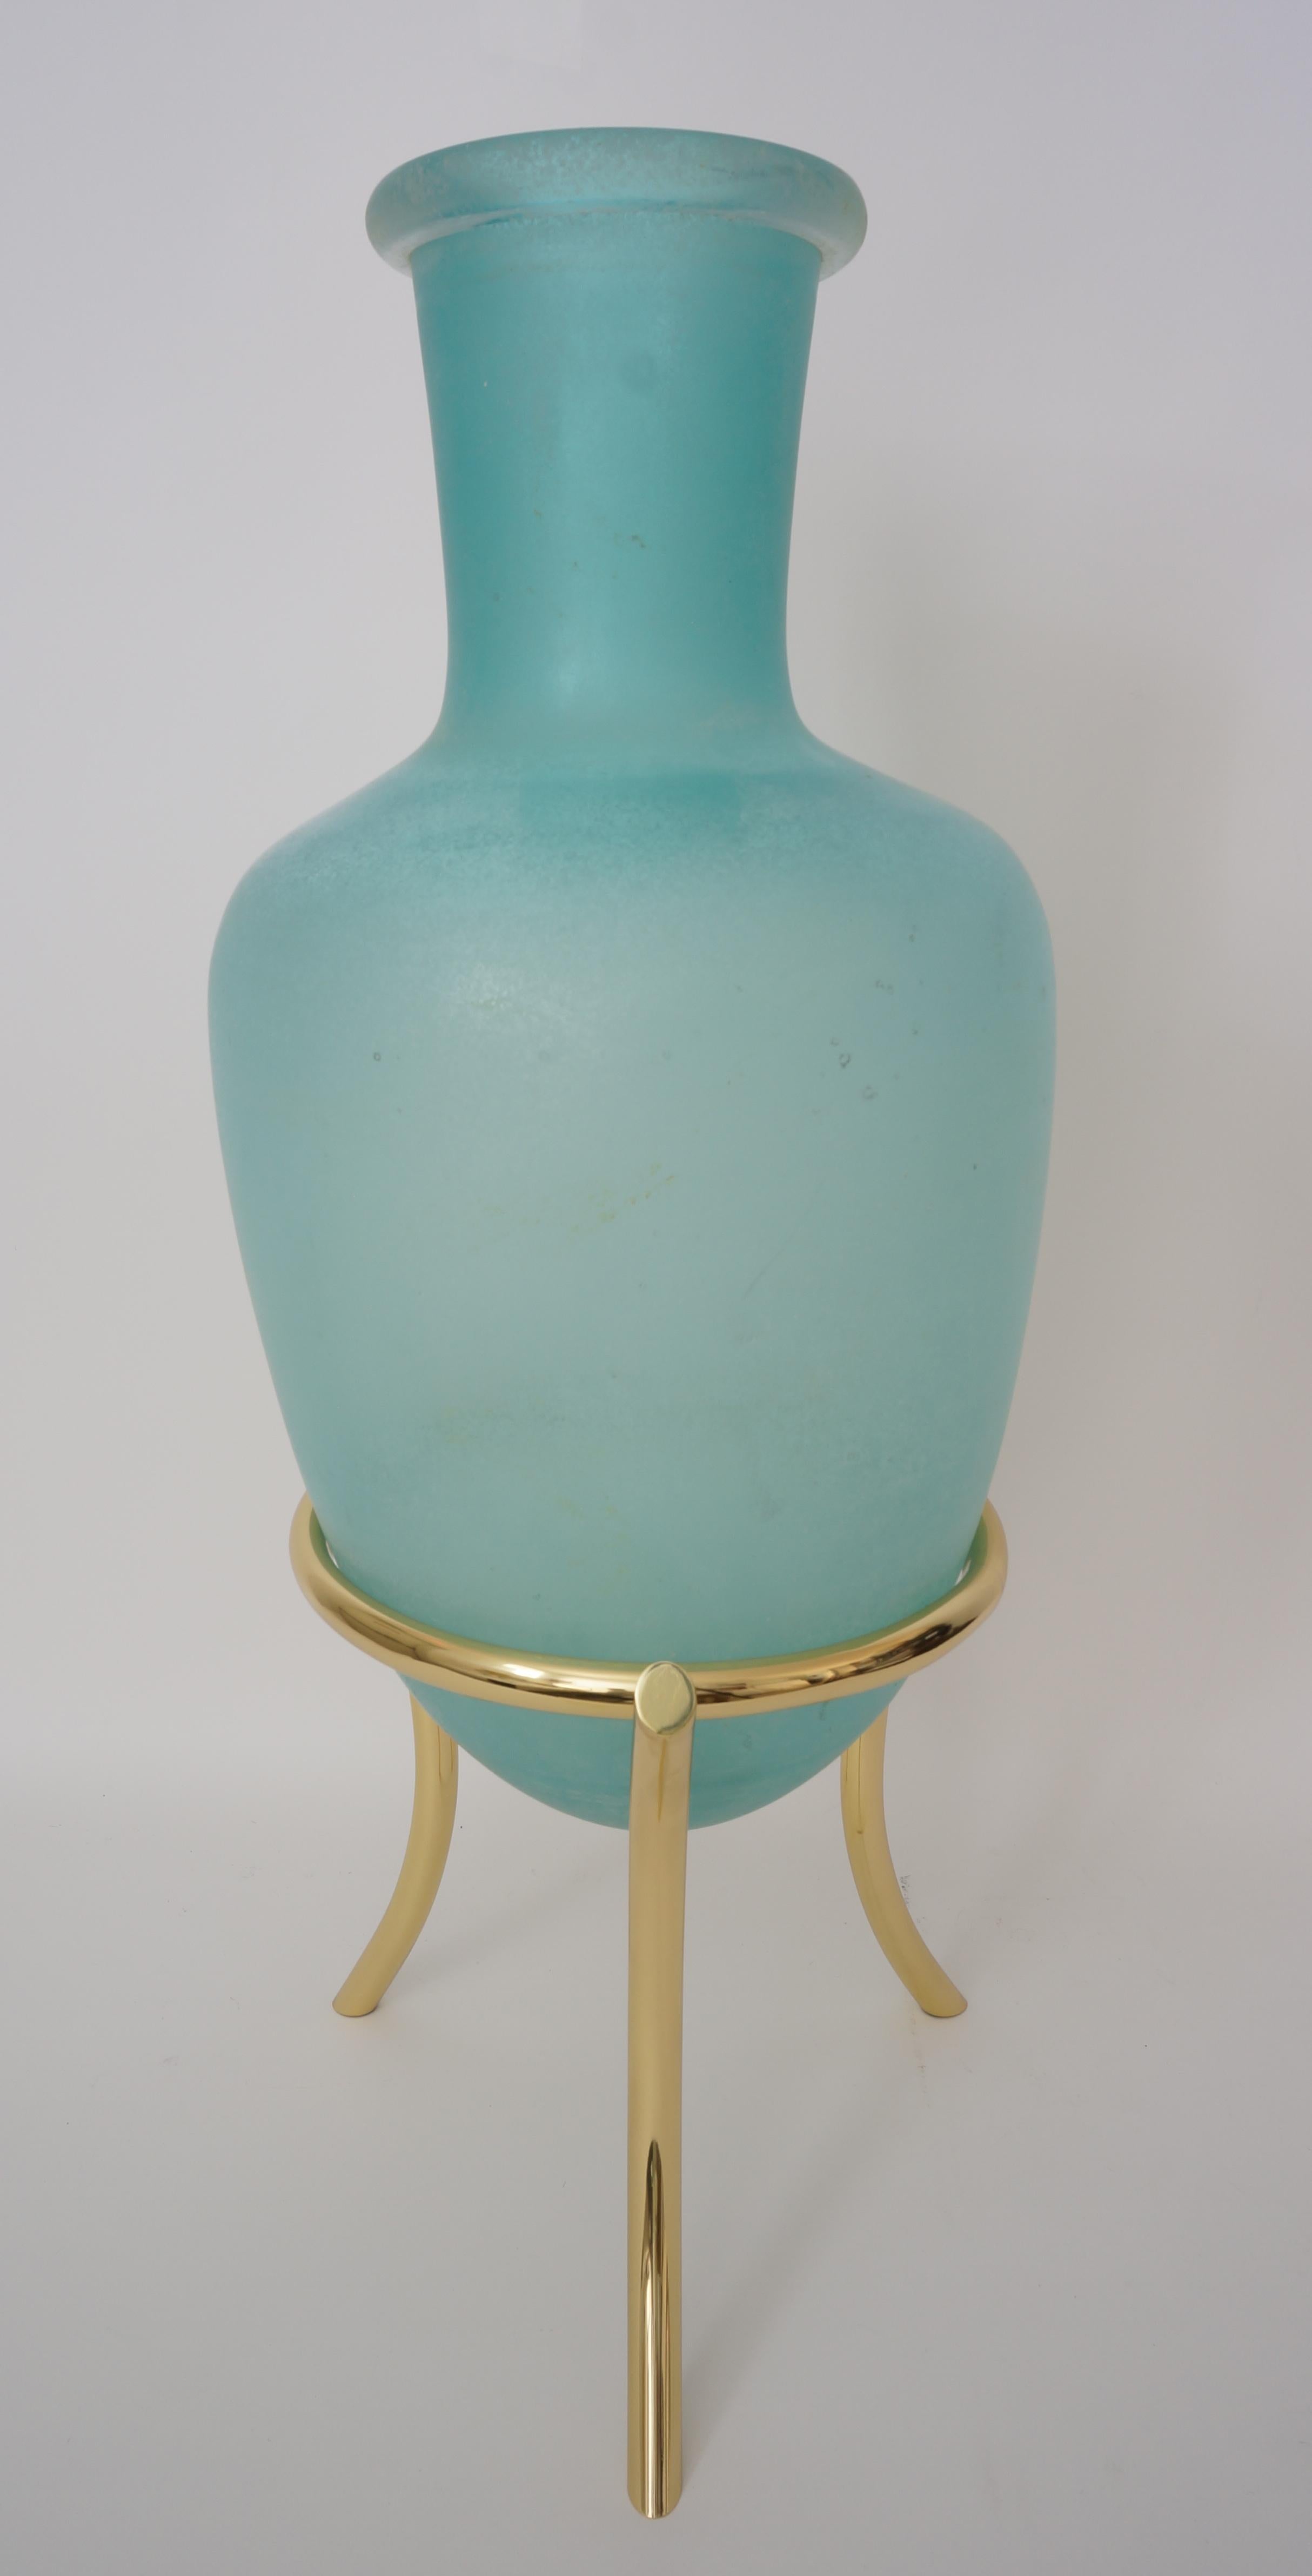 Vintage Scavo Corroso Murano amphora on a polished brass tripod stand from a Palm Beach estate

amphora itself is 12